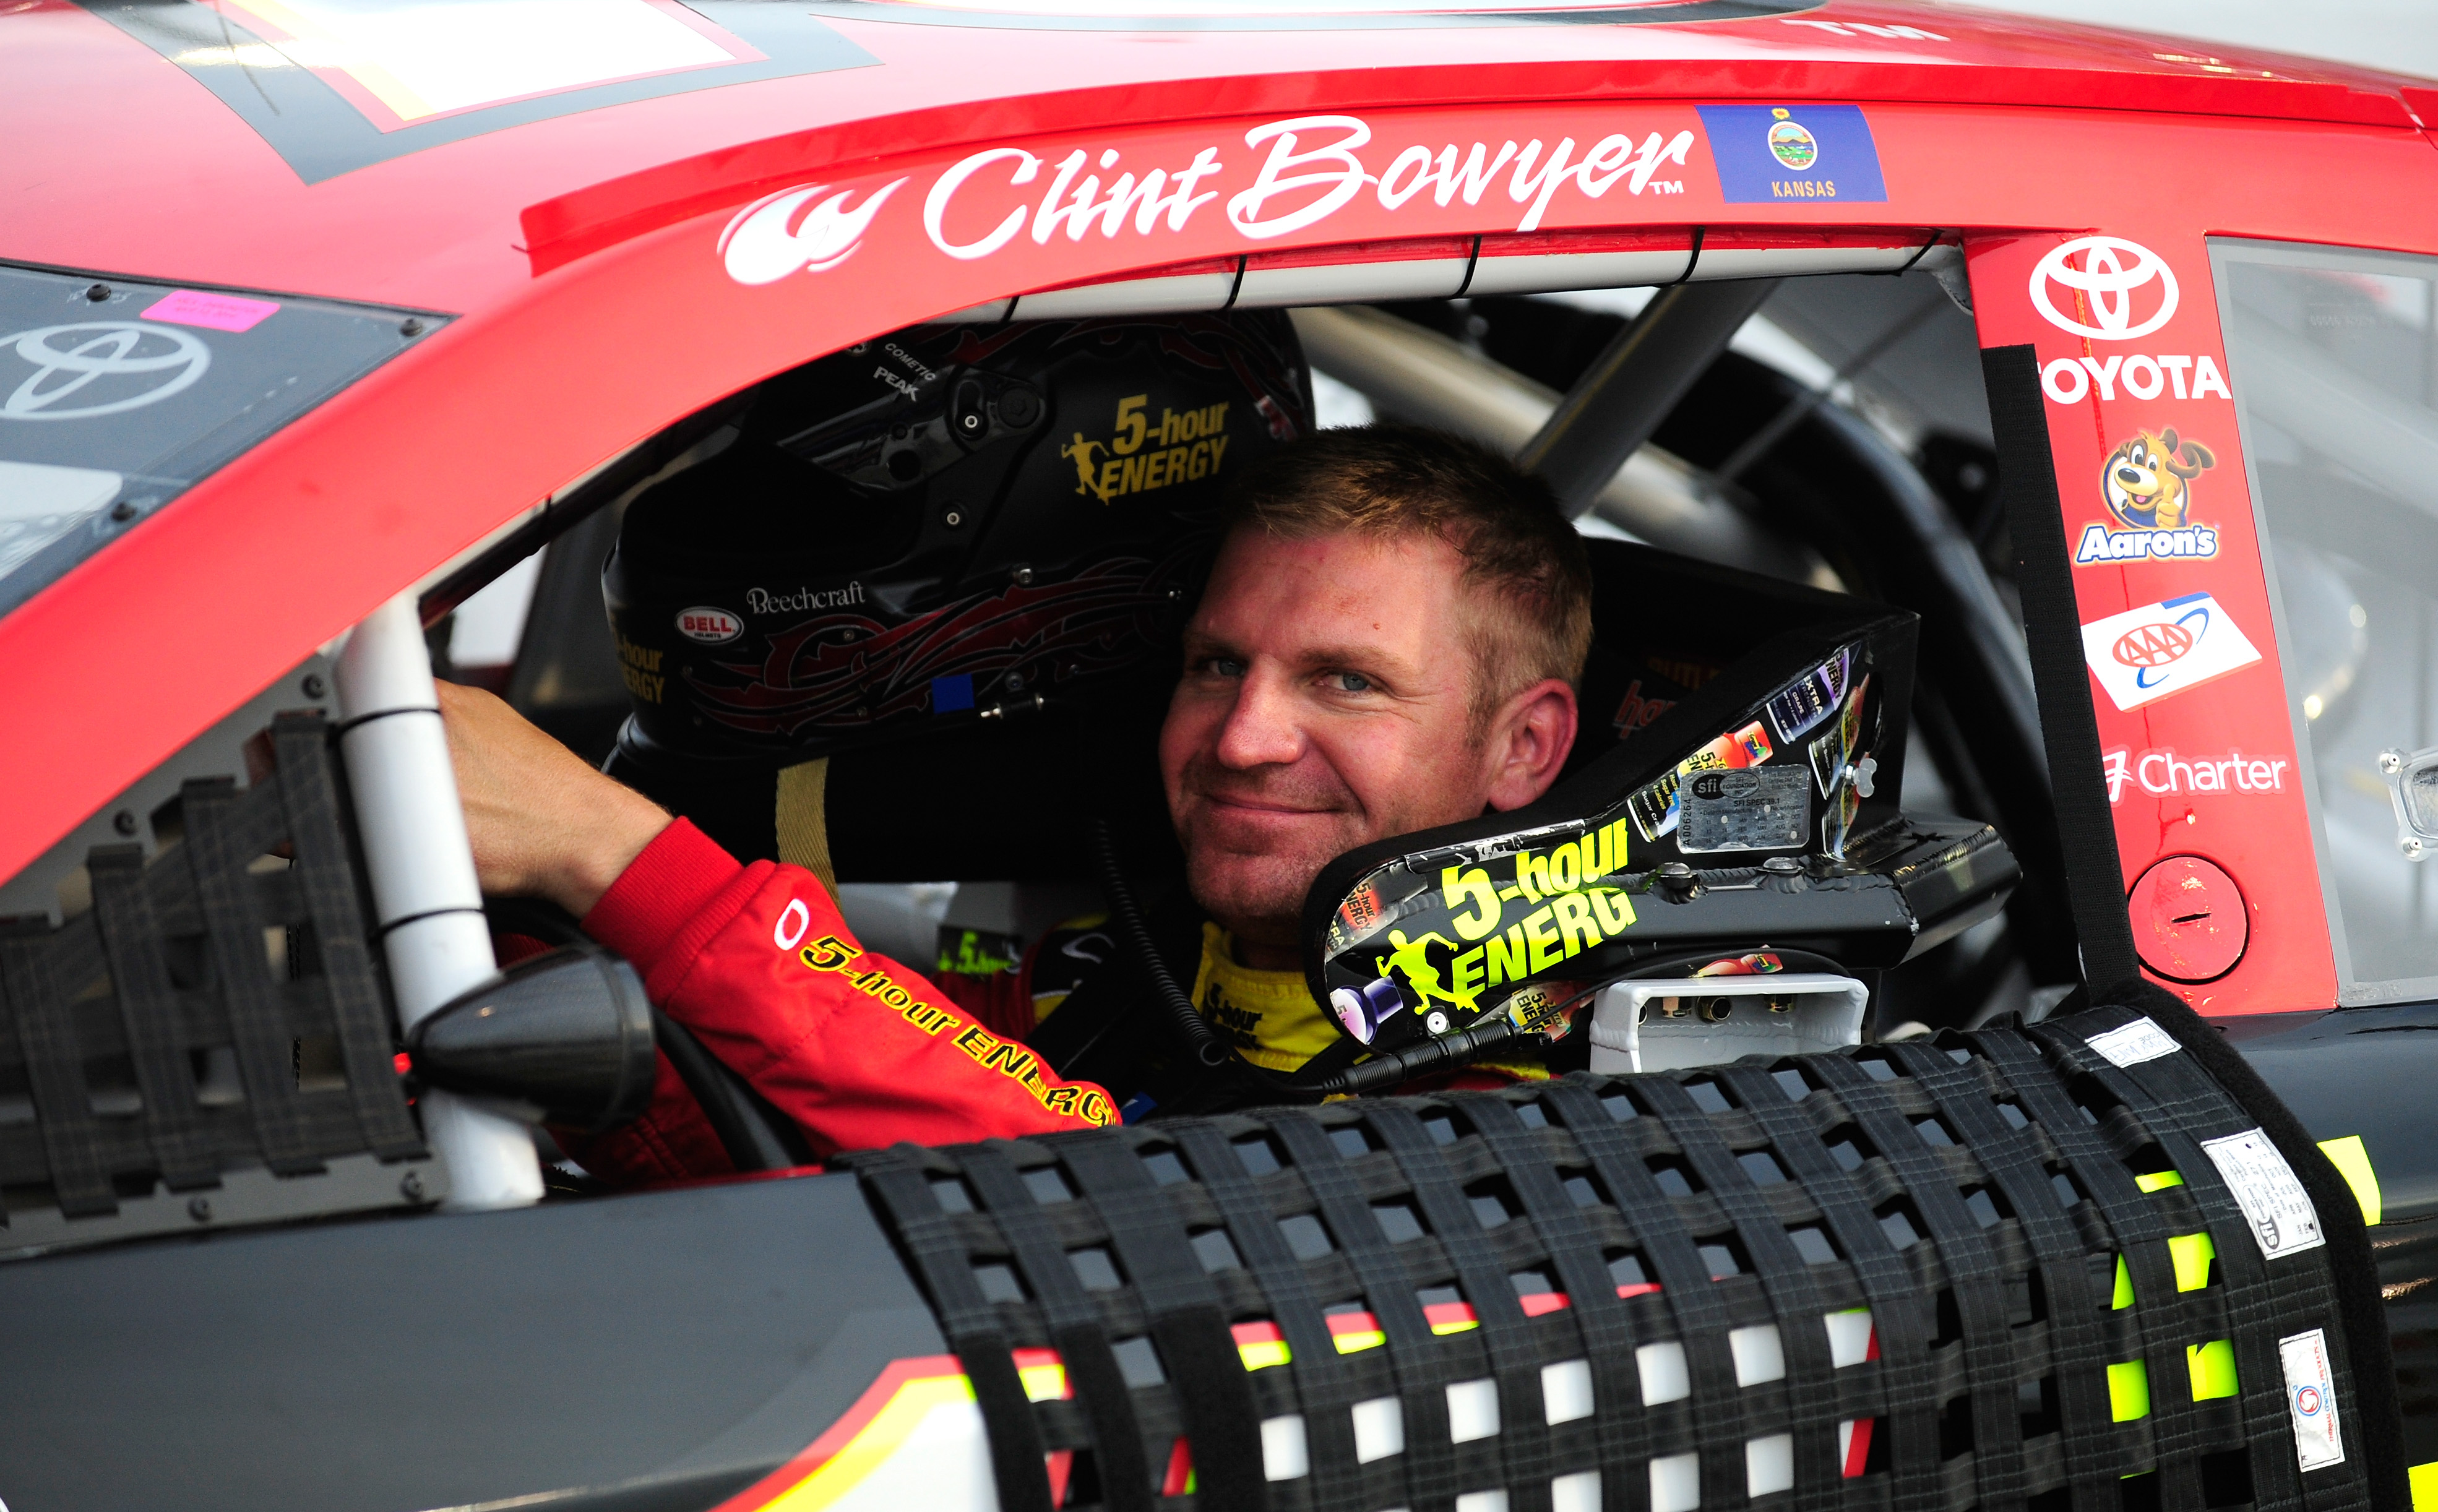 MWR extends contracts with Bowyer, Pattie and 5-Hour Energy